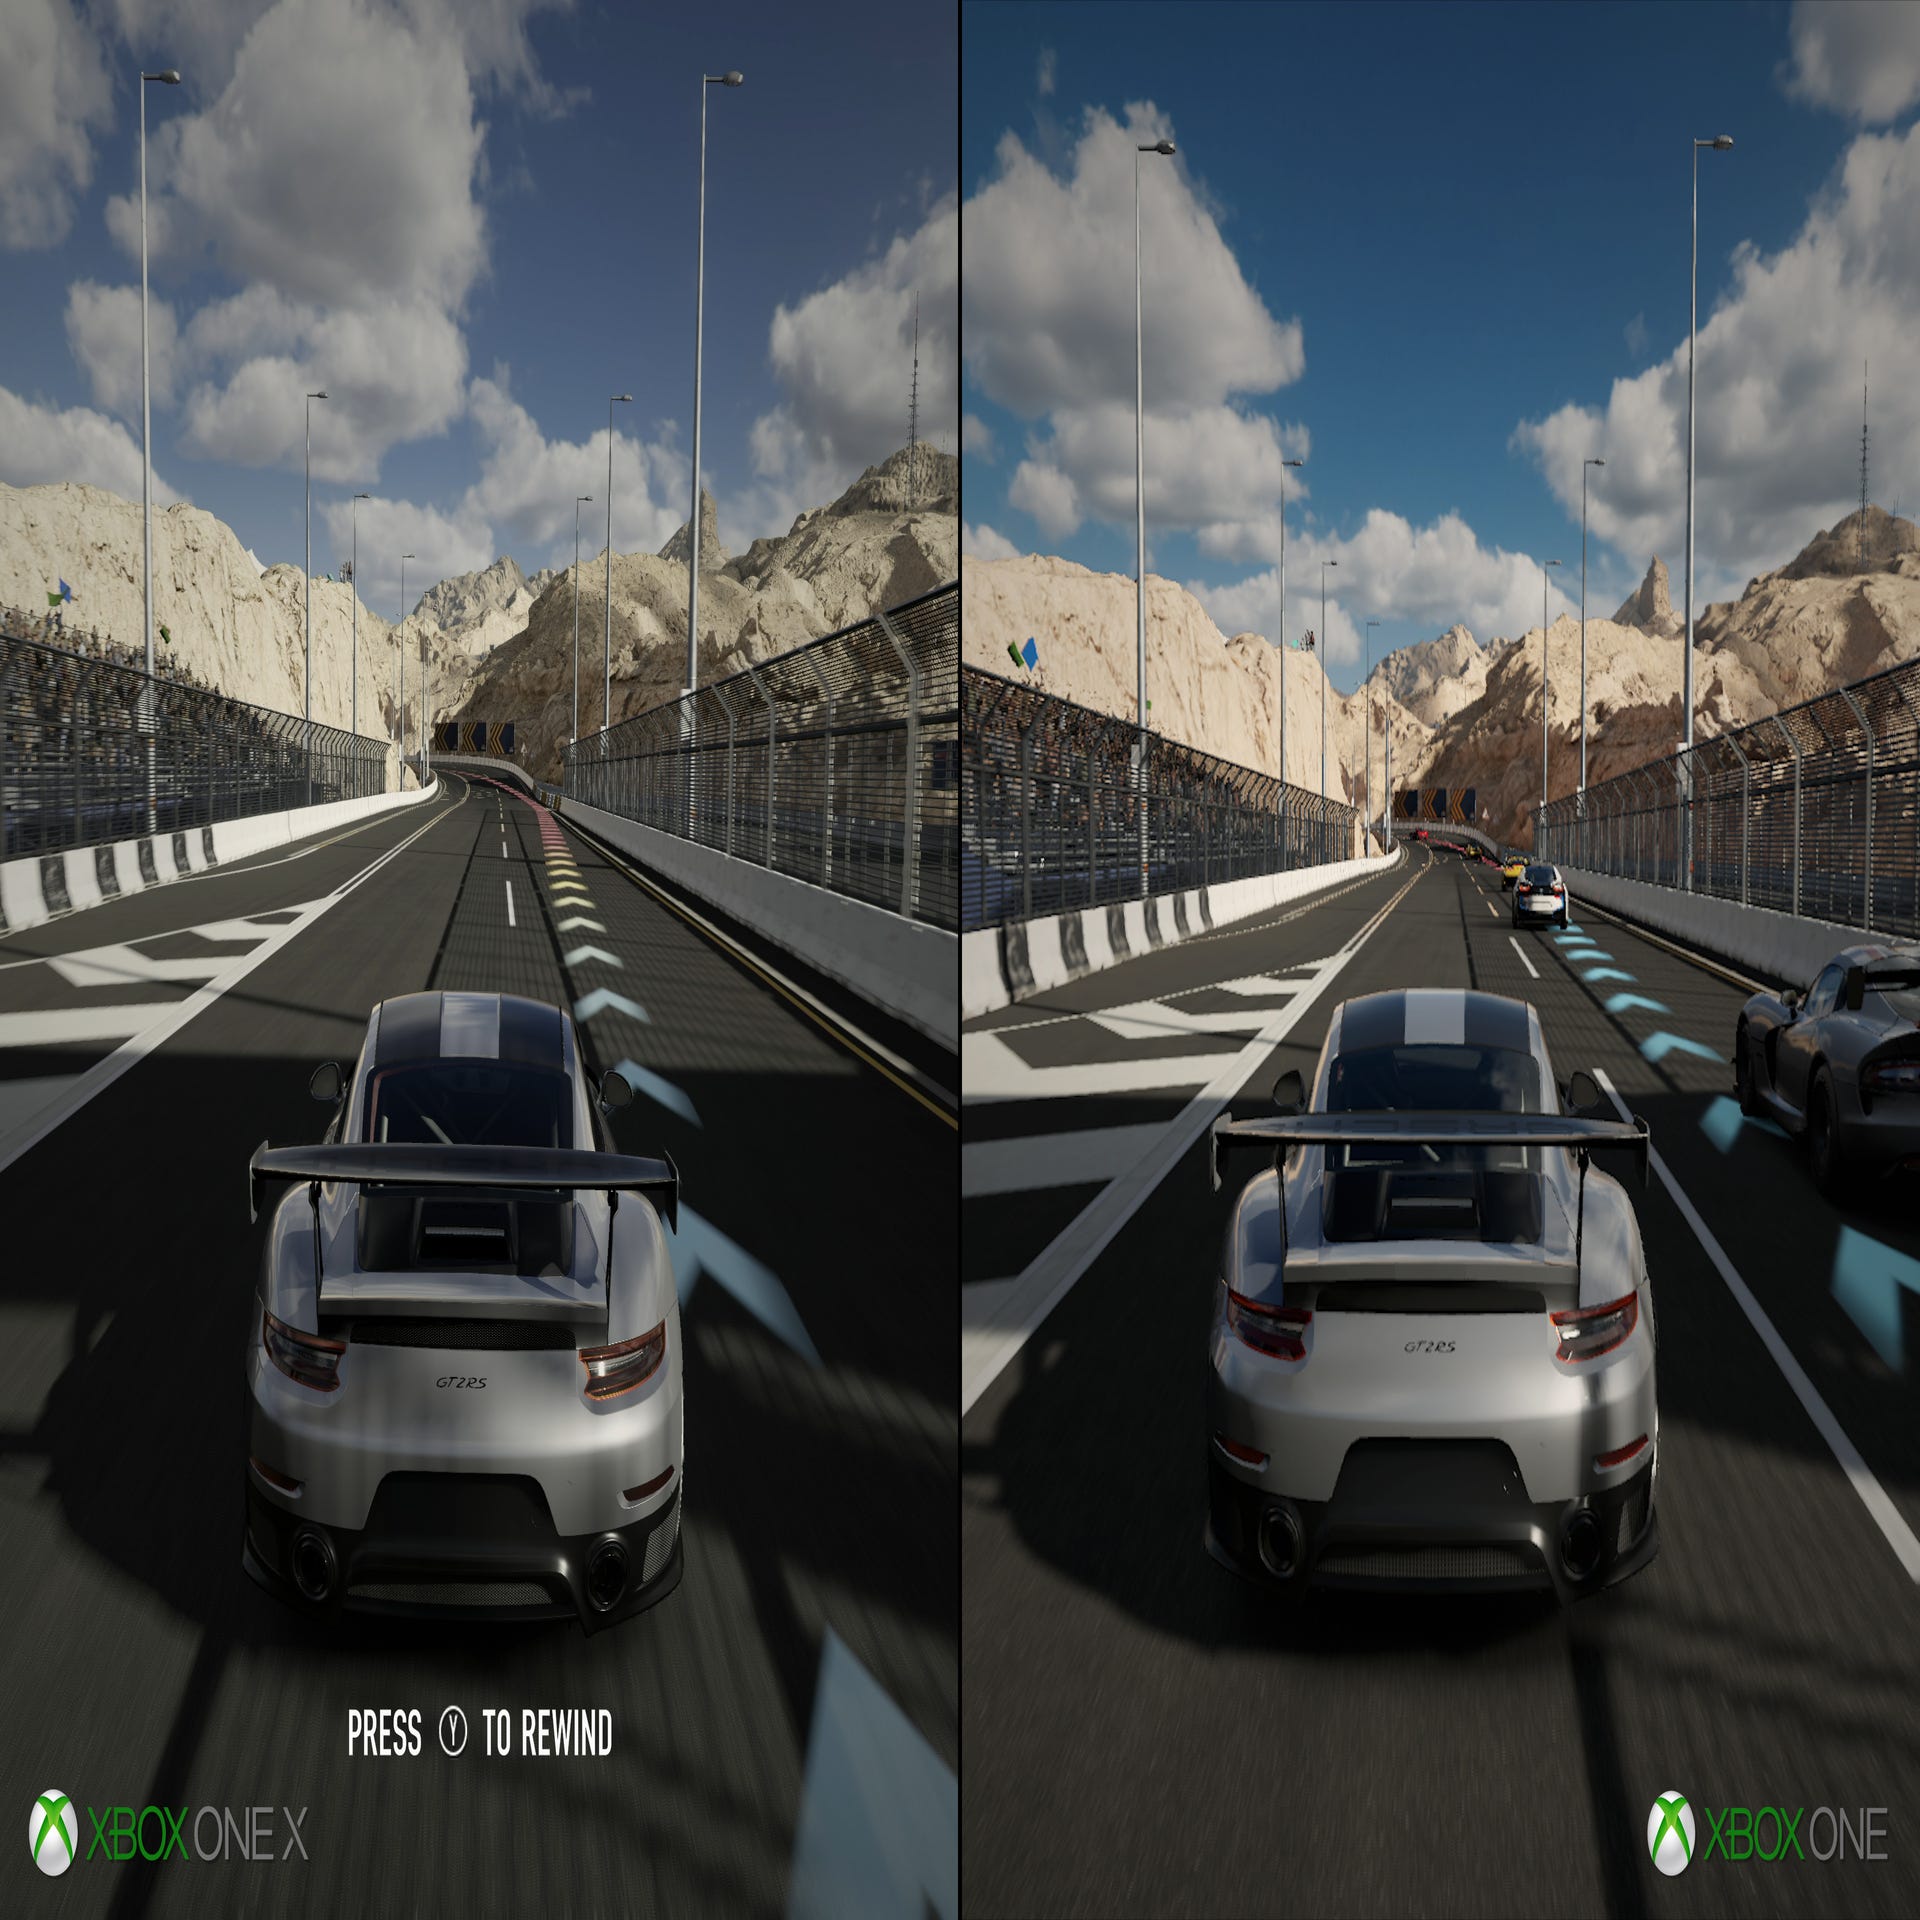 How does Forza 7 improve on Xbox One X over base hardware?